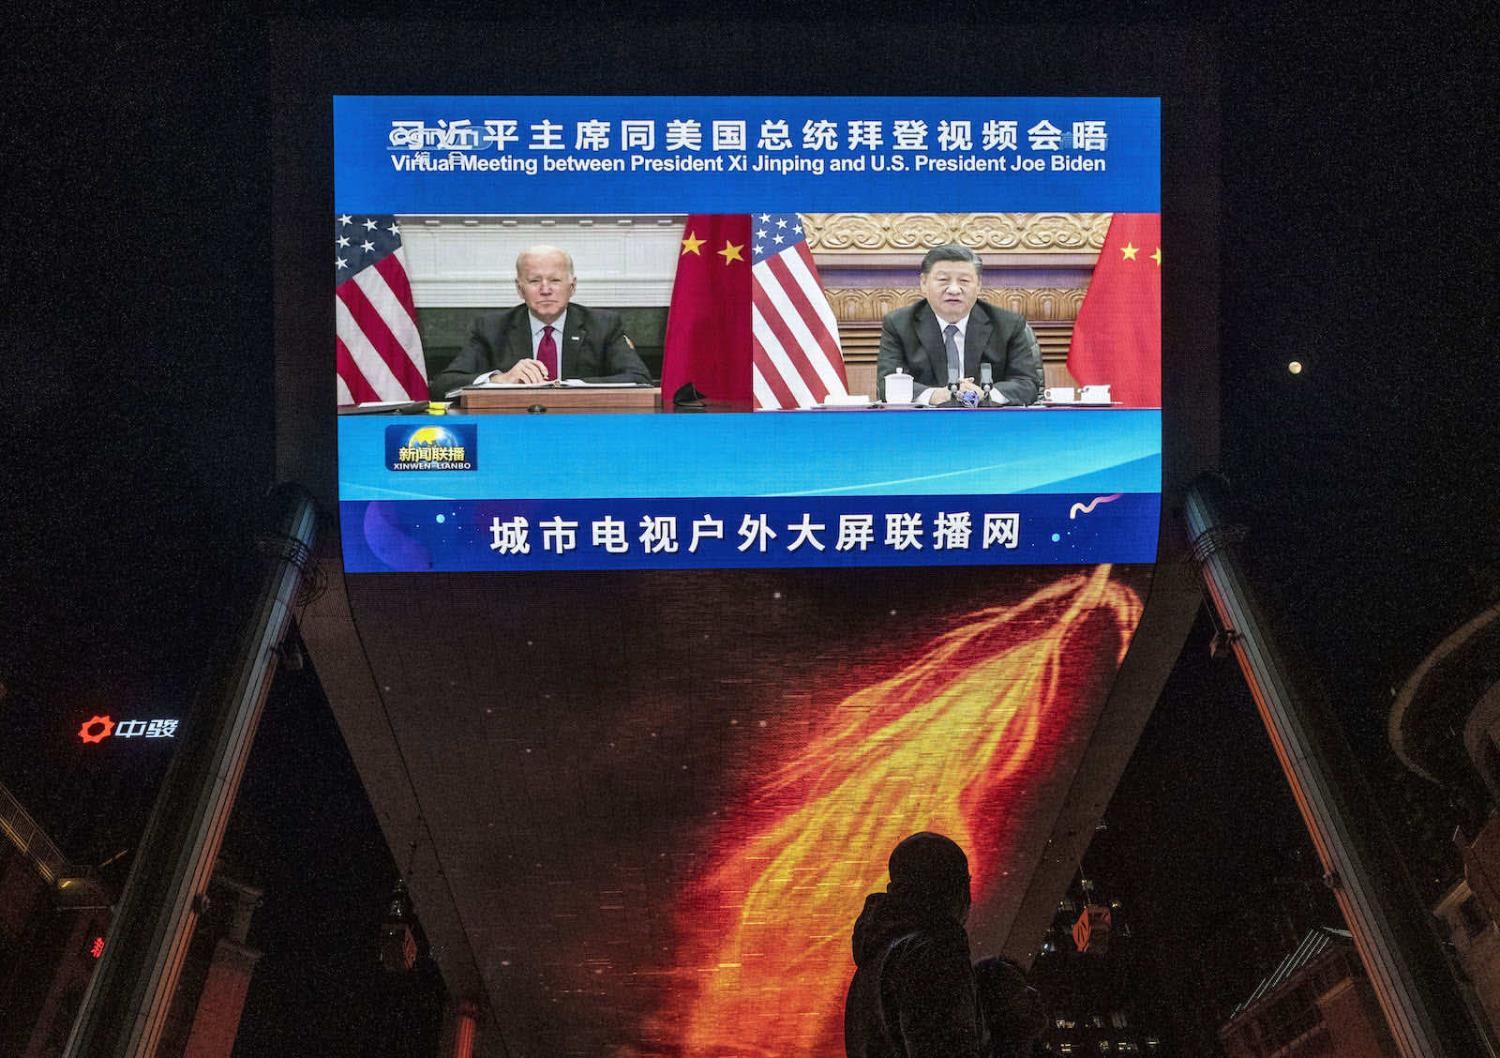 A large outdoor screen in Beijing displays United States President Joe Biden, left, and China’s President Xi Jinping during their virtual summit in November (Kevin Frayer/Getty Images)